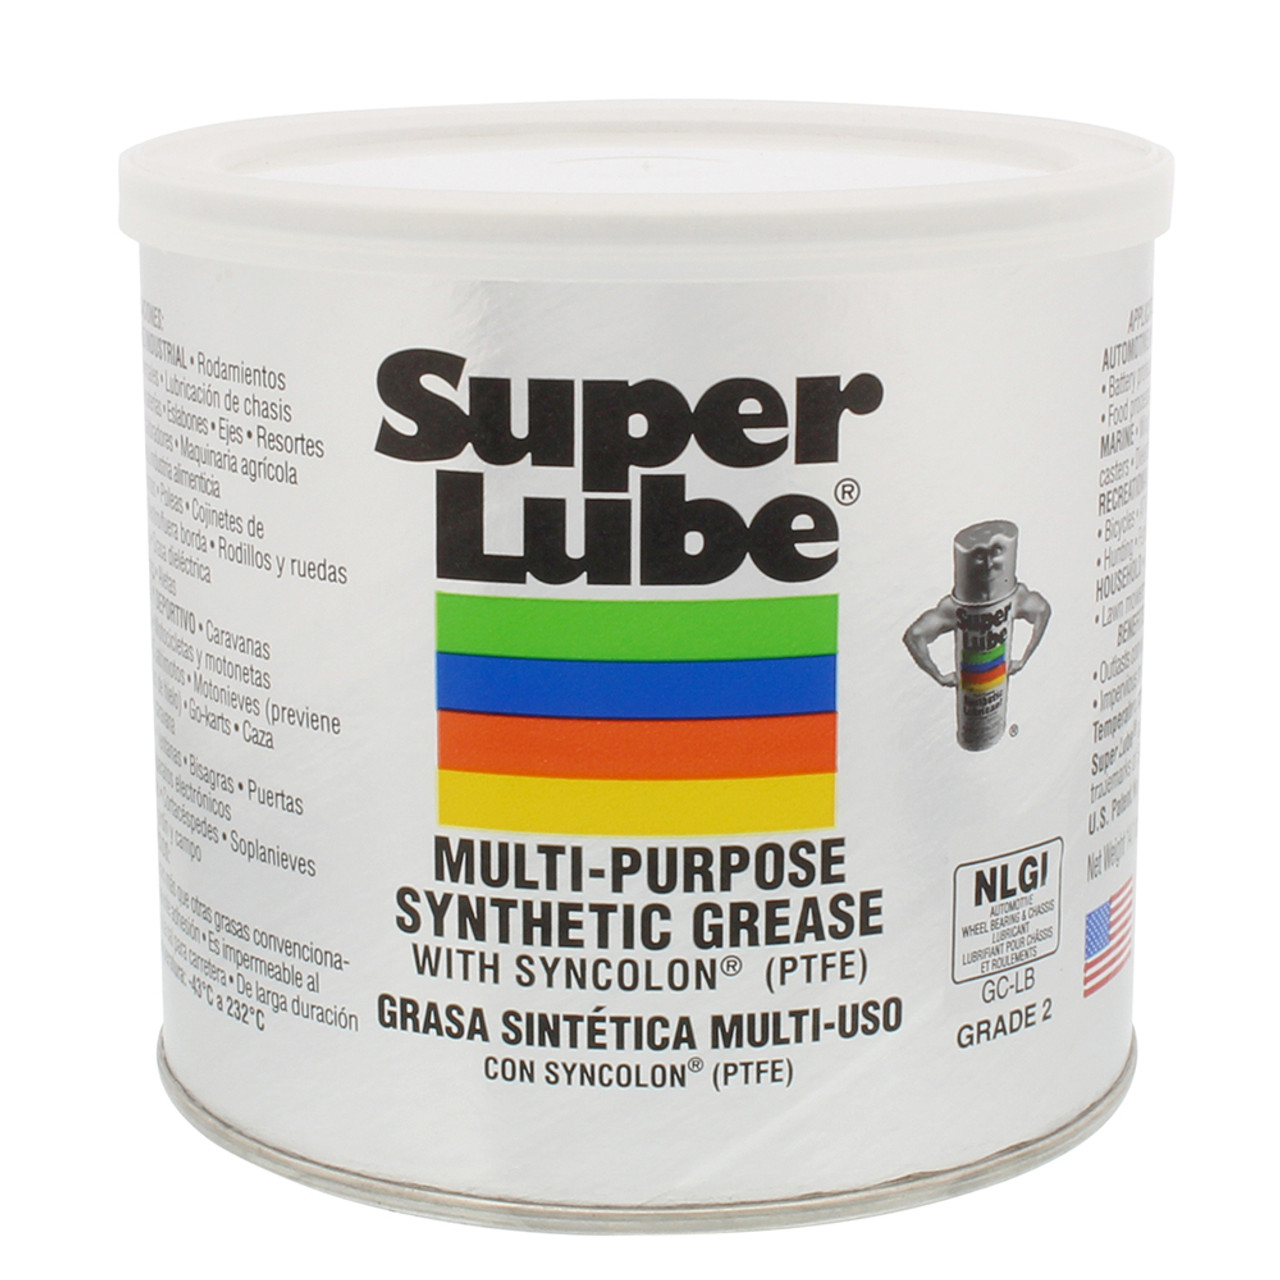  Super Lube Grease Dielectric, Synthetic 3 Oz. Usda Authorized  Tube 3 pack : Automotive